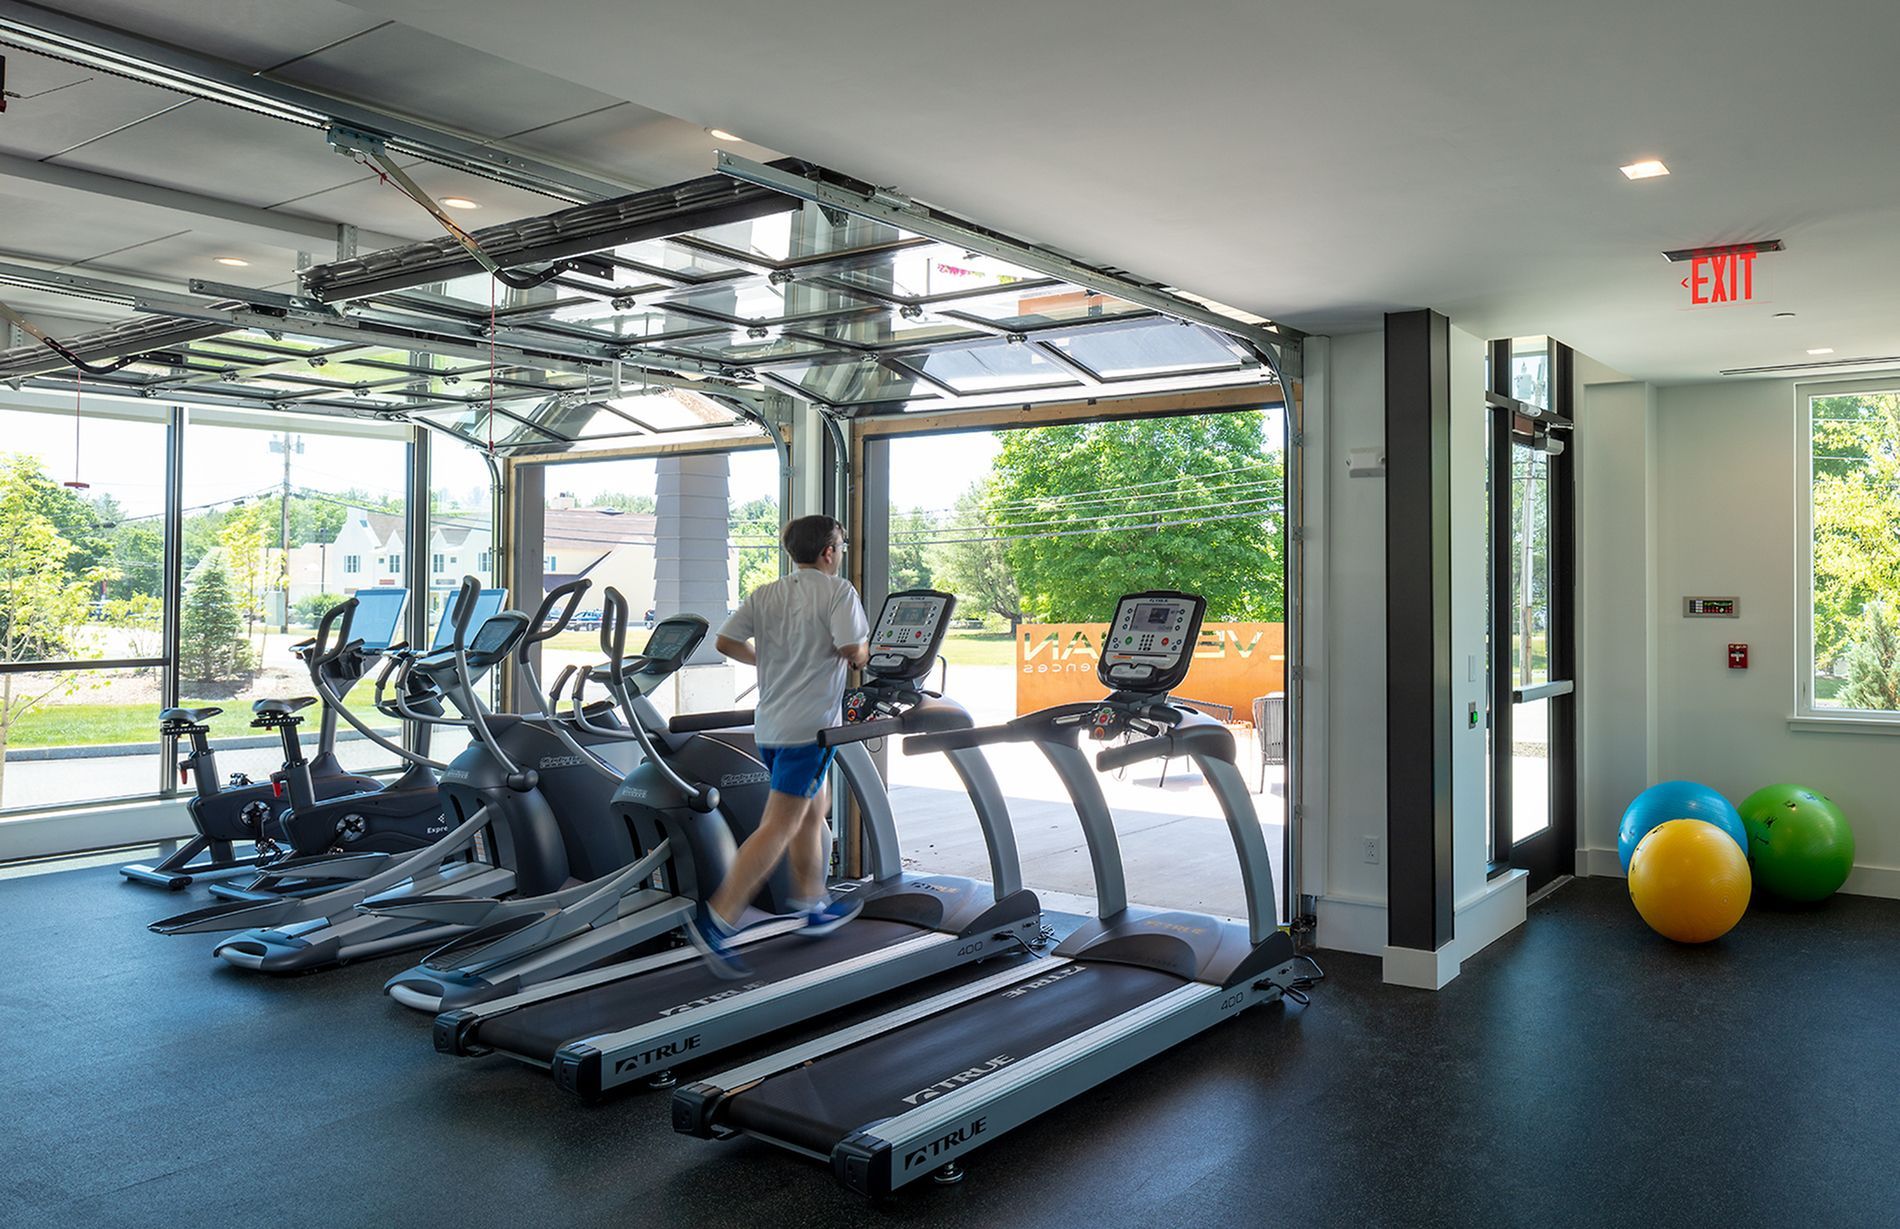 Treadmills at The Veridian Residences.